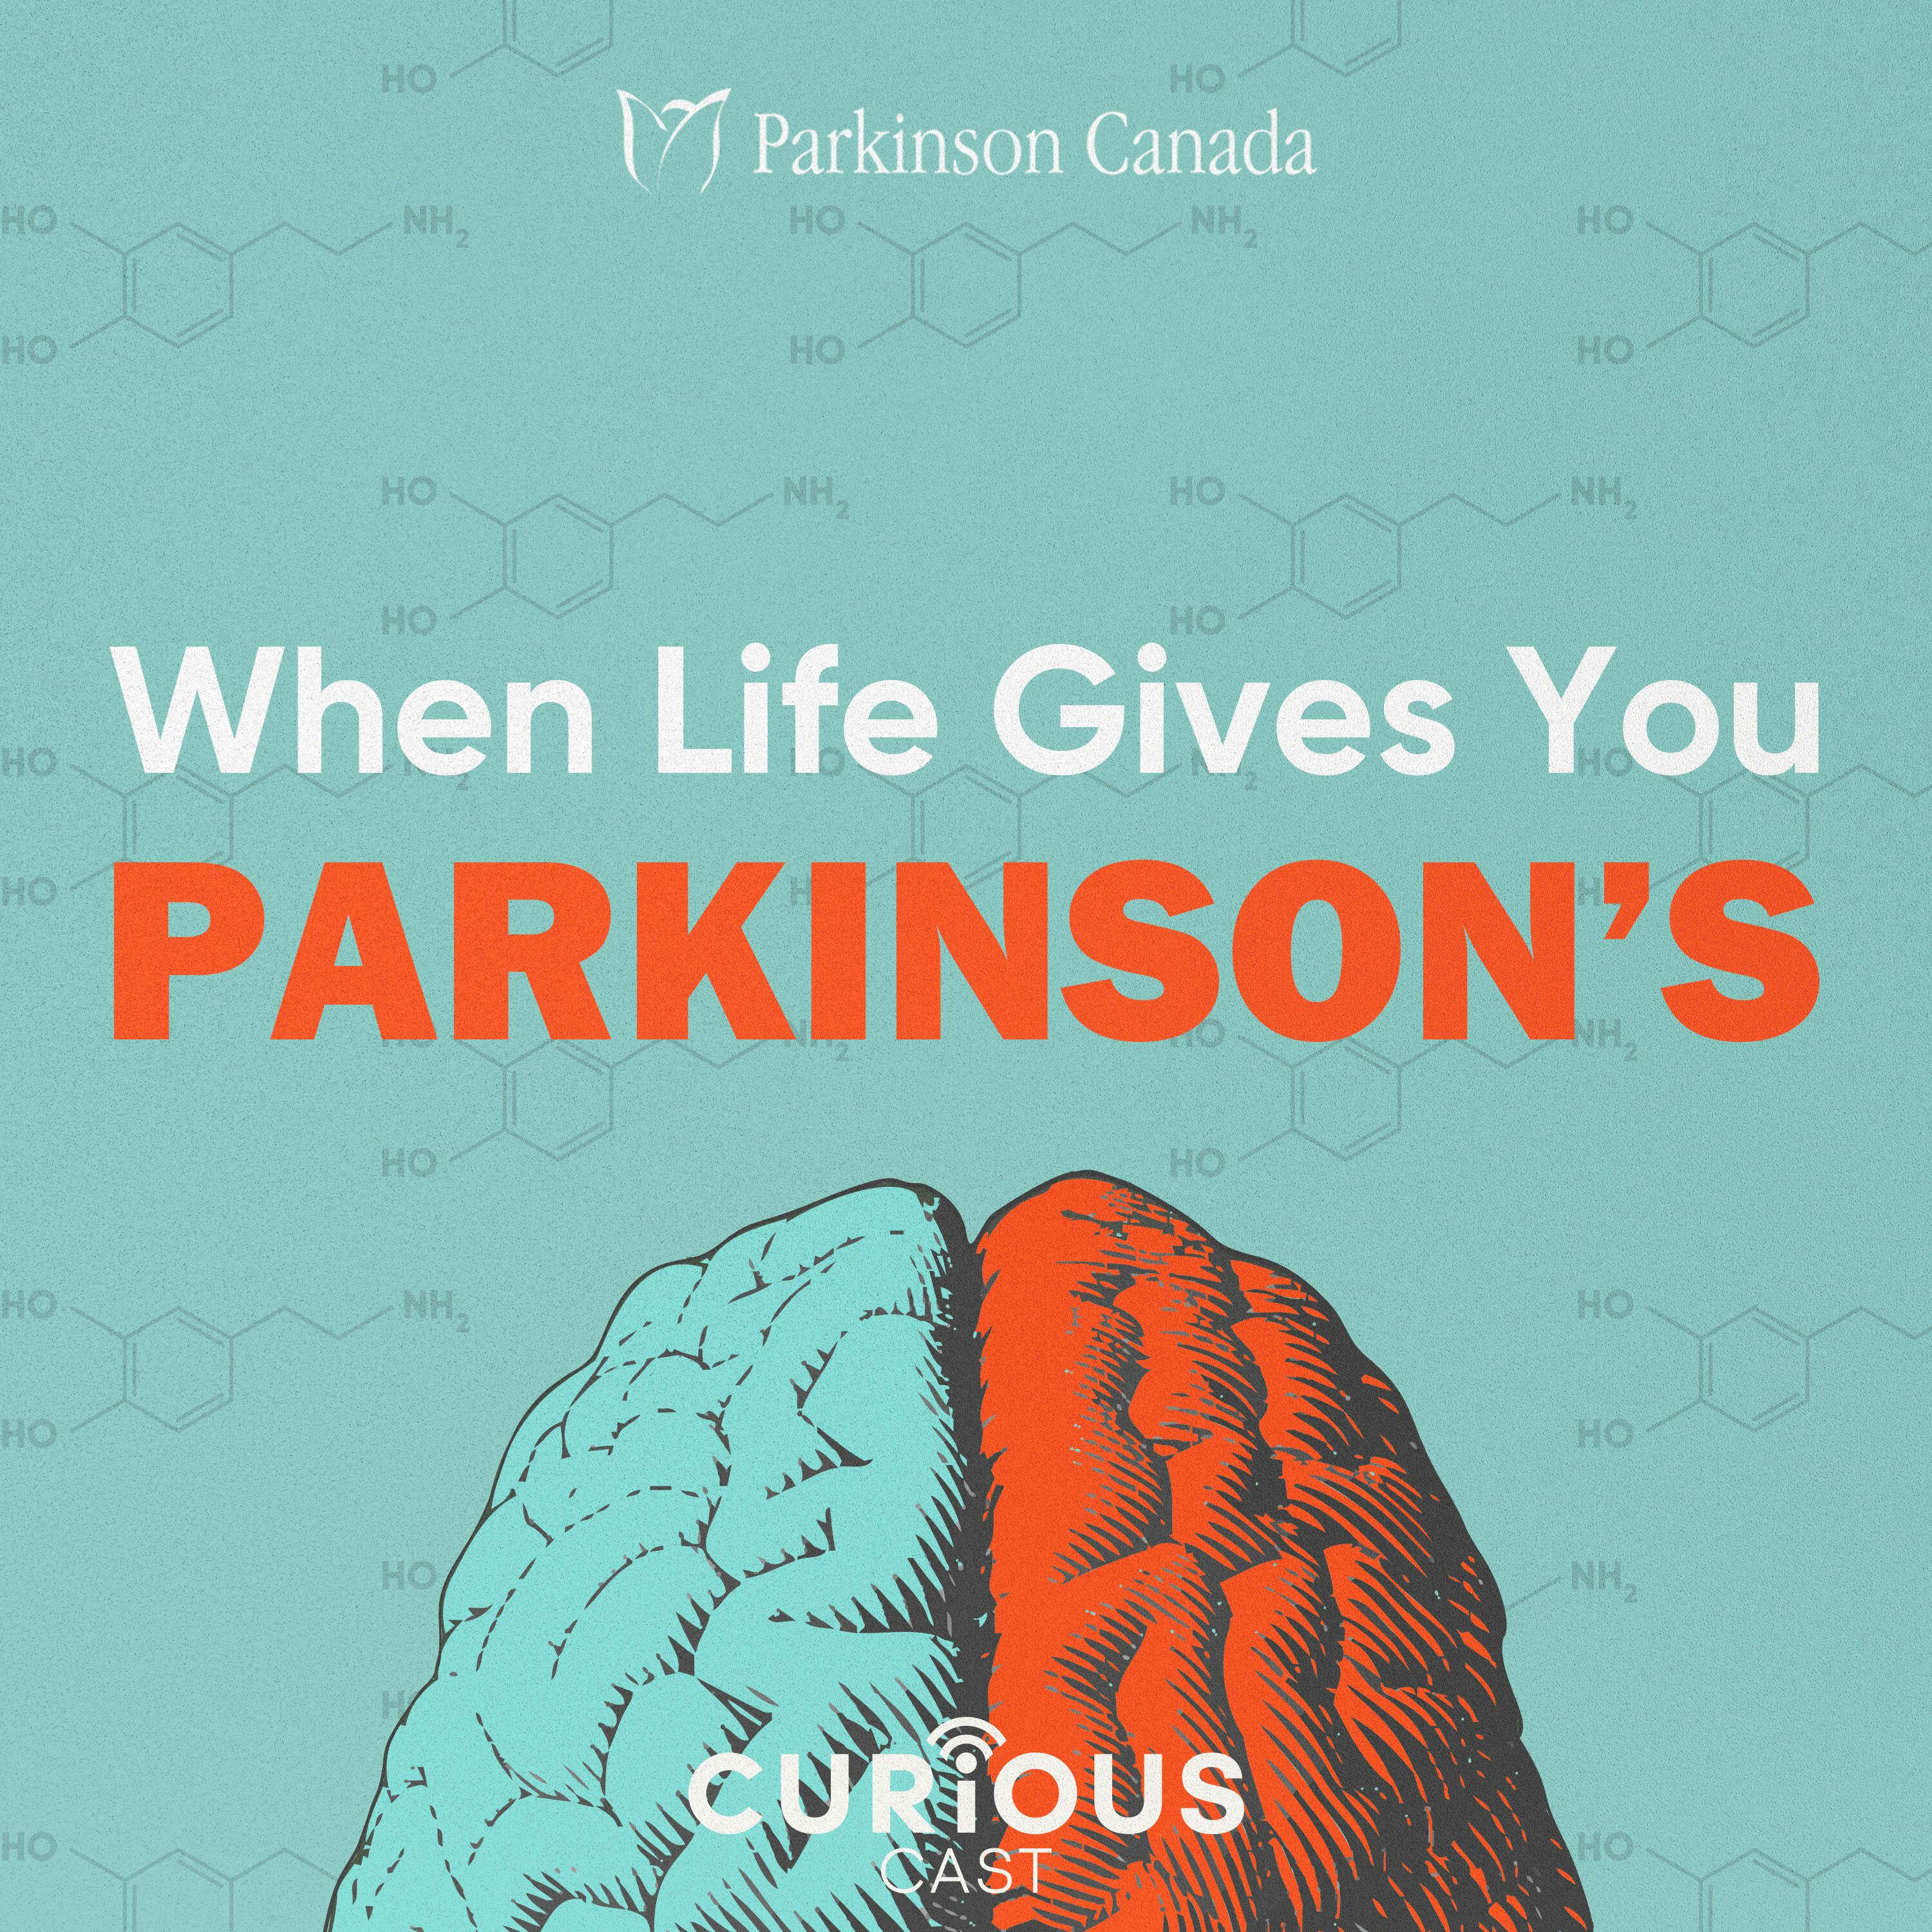 The Never-ending Hunt For a Parkinson's Cure